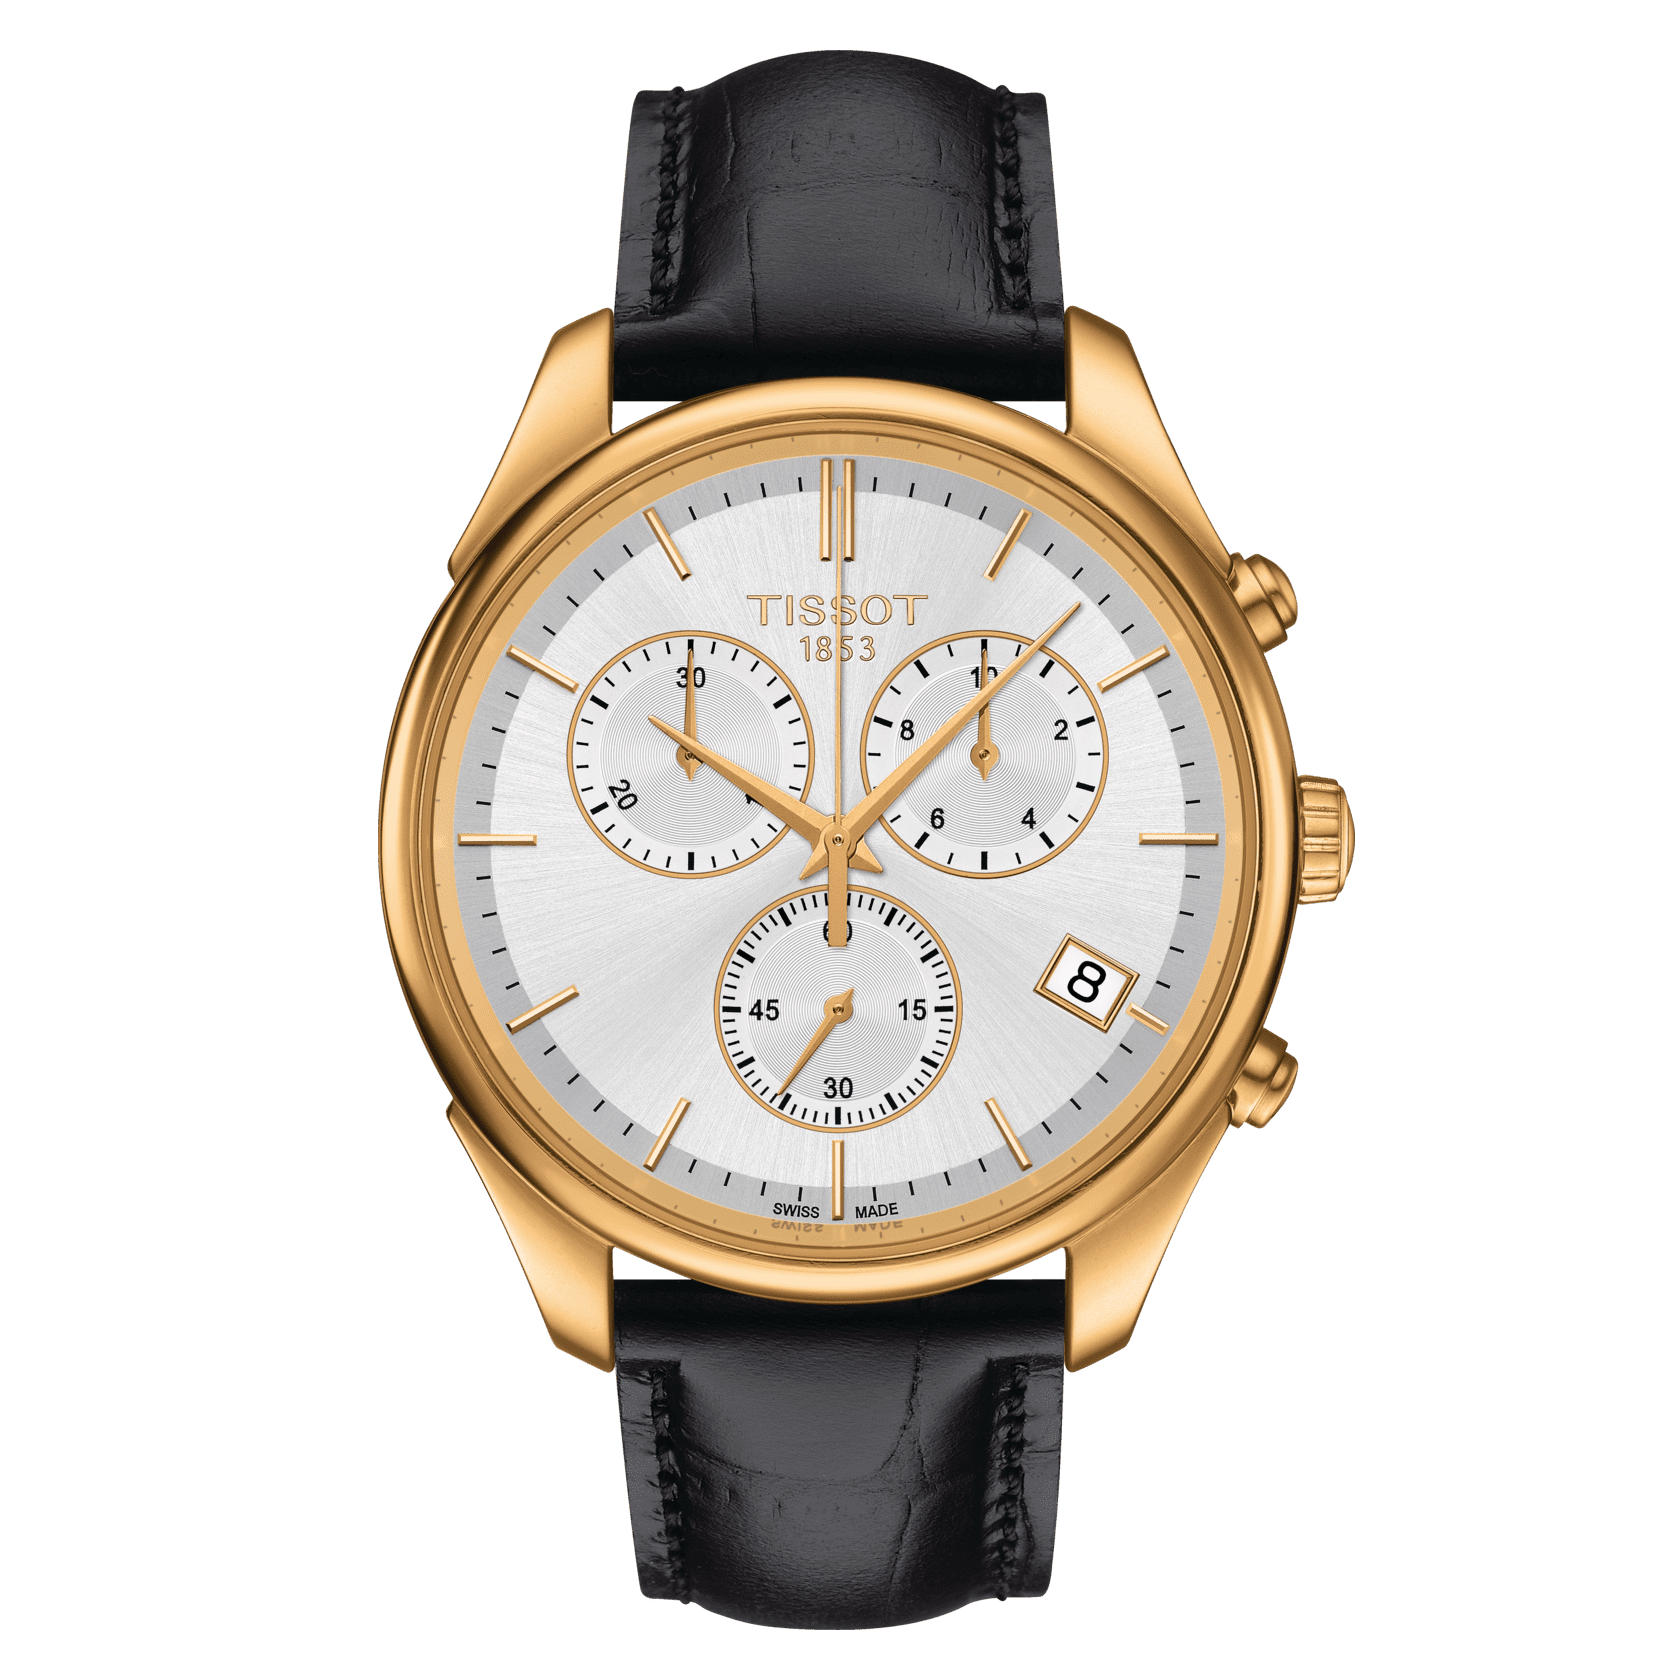 What Are The Best Replica Watches